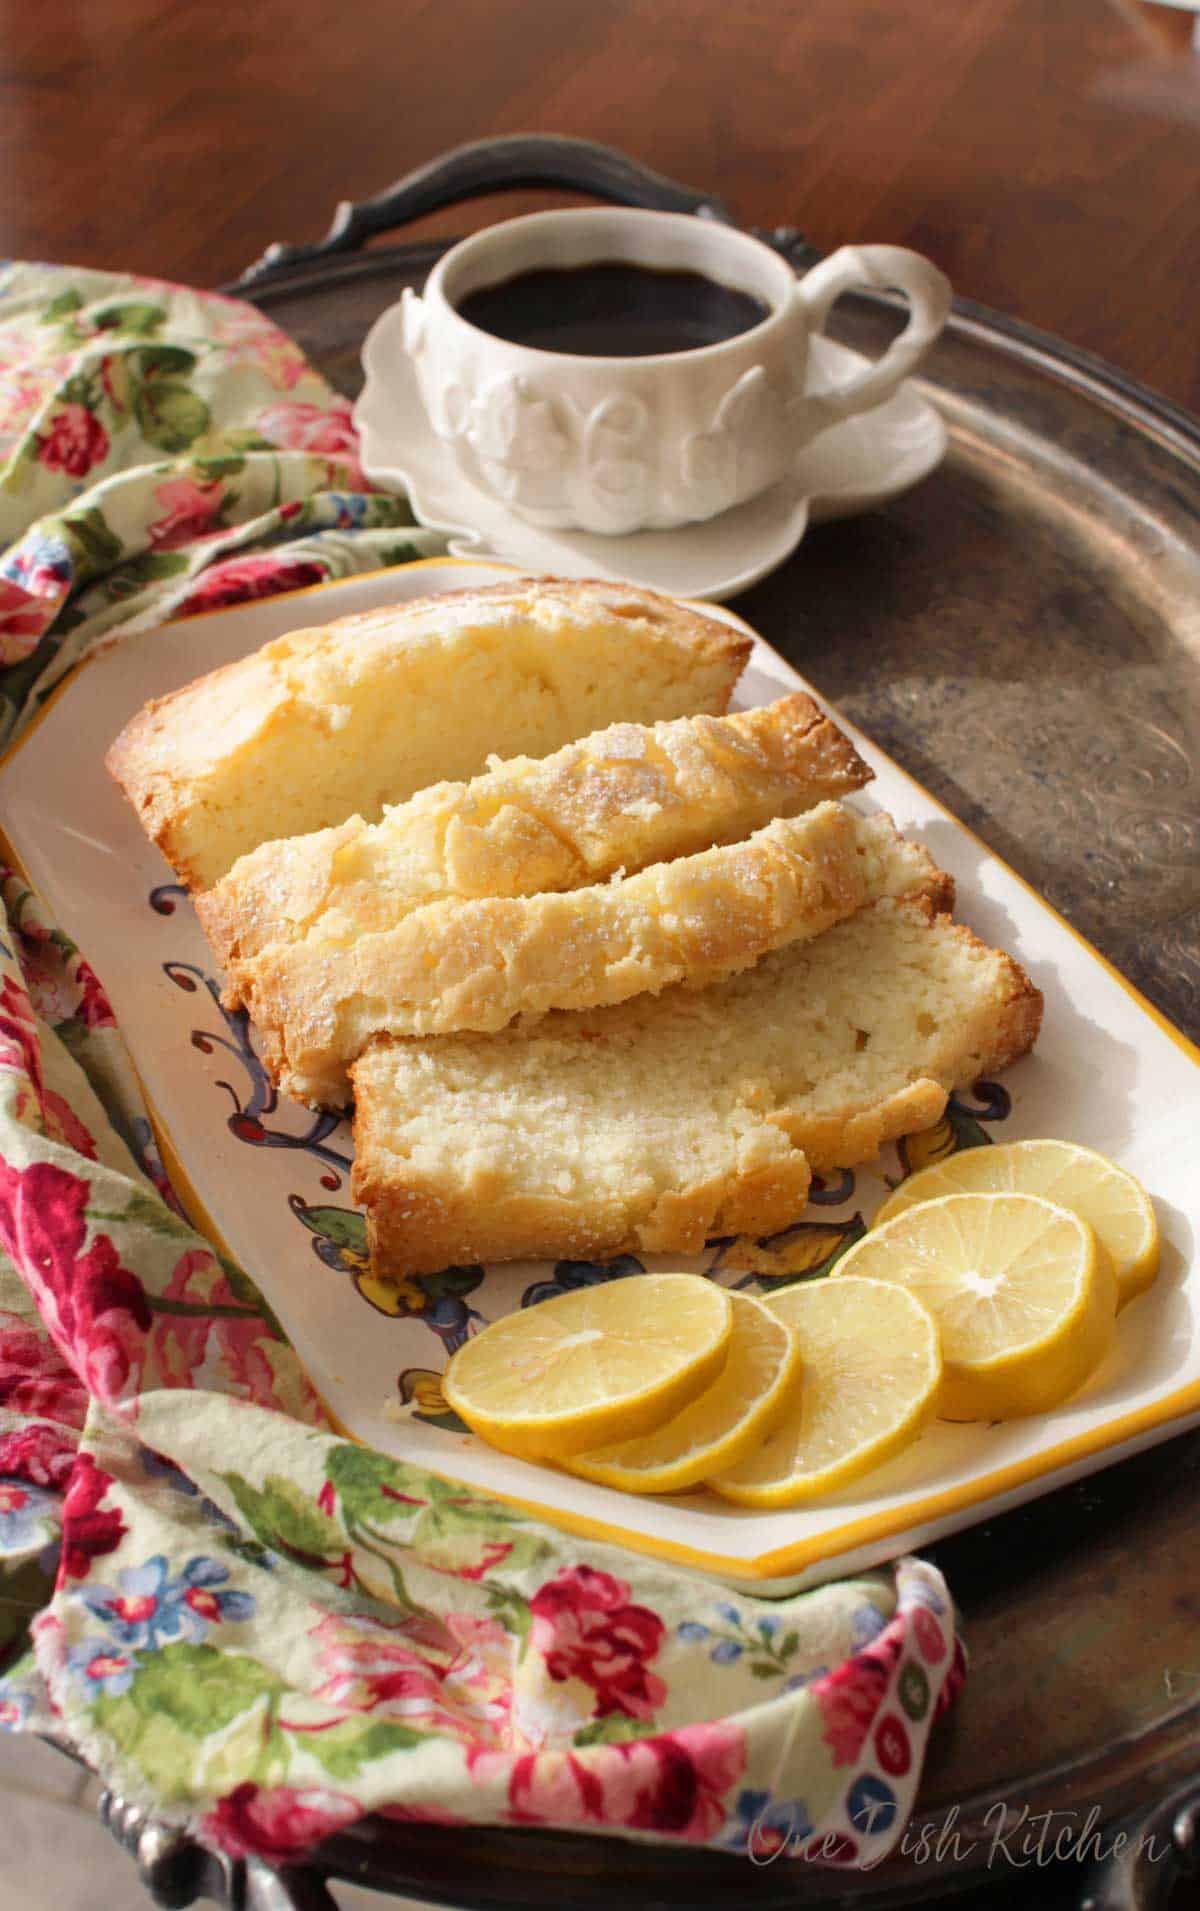 Four slices of pound cake dusted with powdered sugar on a plate with five decorative lemon wheels on a metal tray with a mug of coffee and a floral cloth napkin